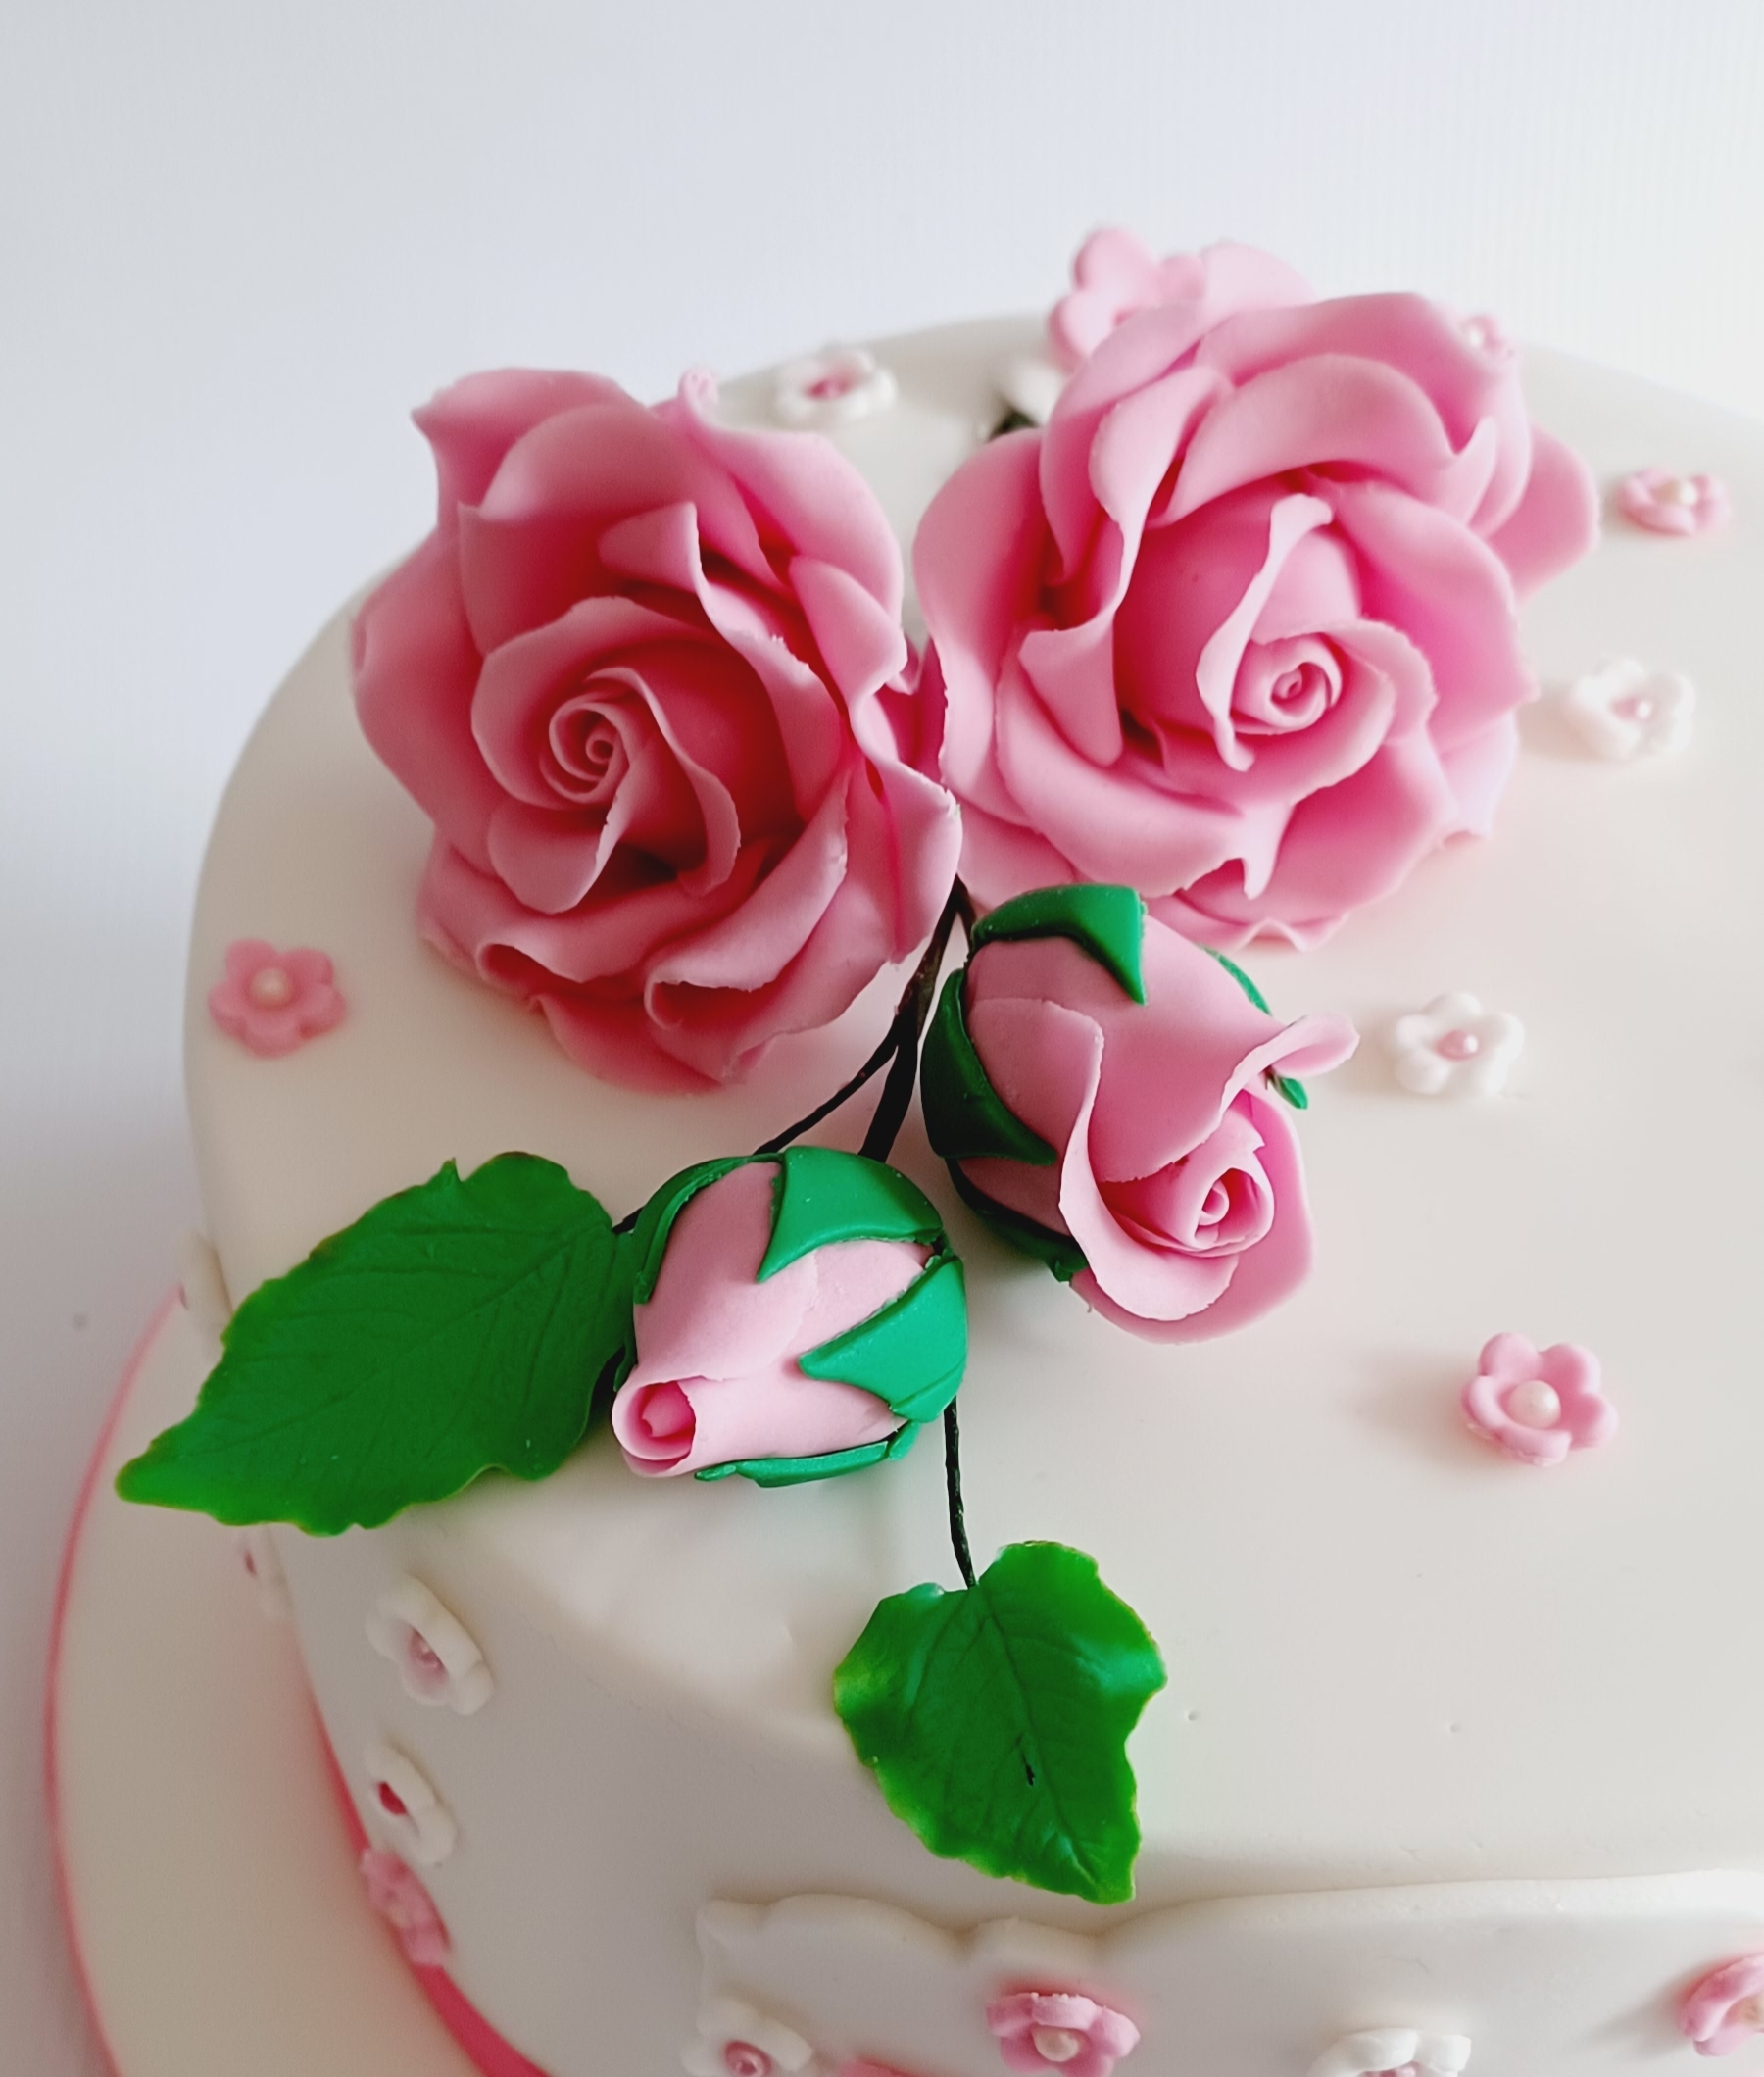 Thursday, November 2nd | 6:00PM-8:30PM | Cake Decorating with Scratch